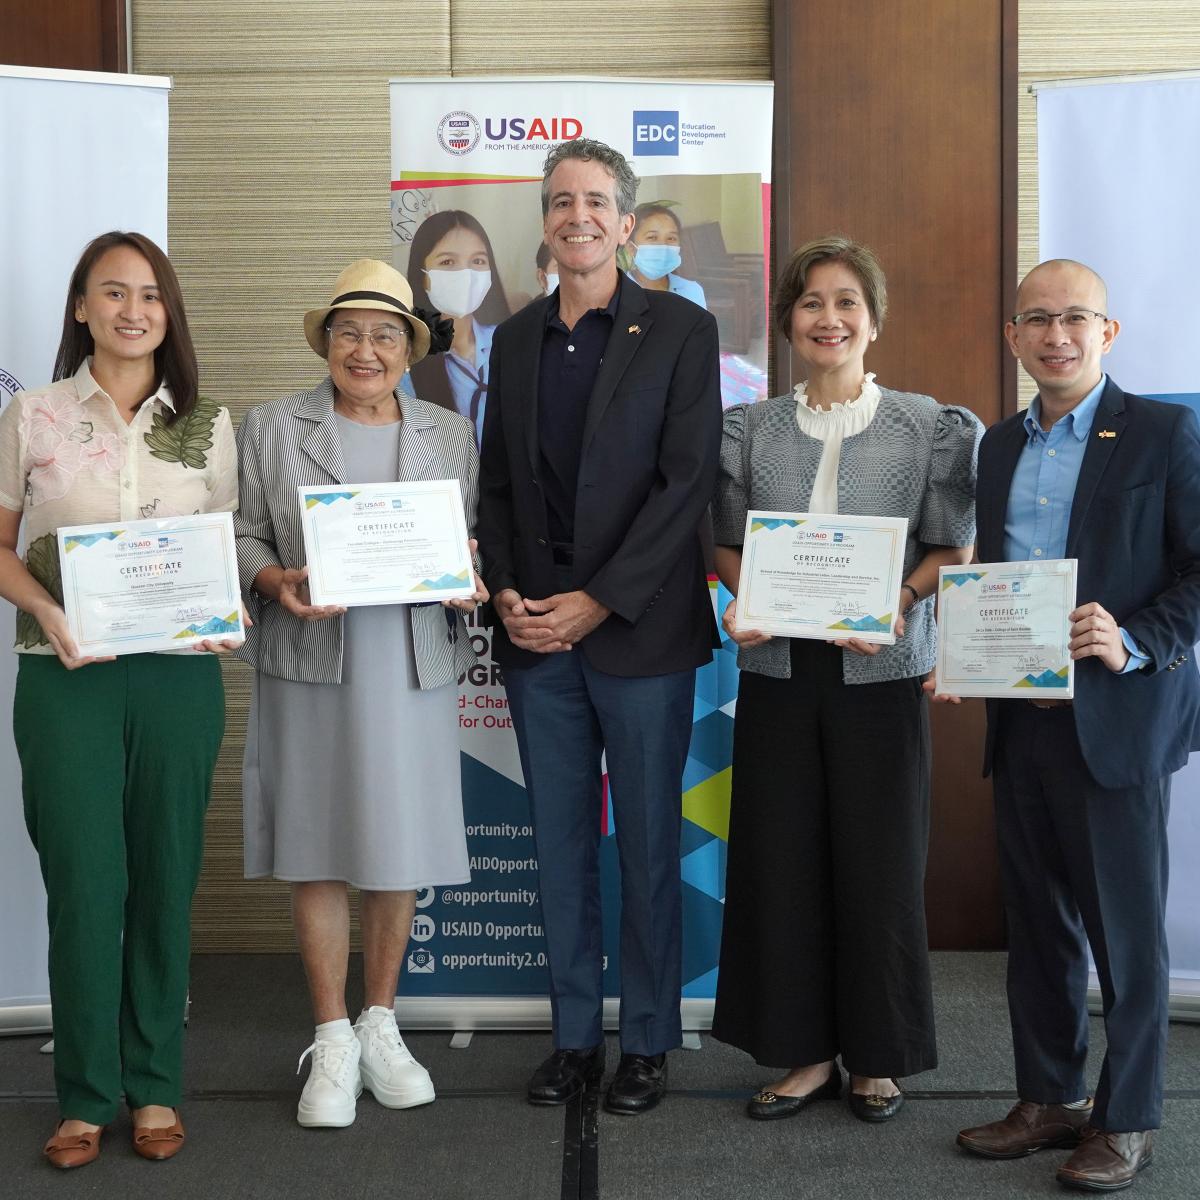 U.S. Provides Php8 Million in Grants to Boost Higher Education Programs for Out-of-School Youth